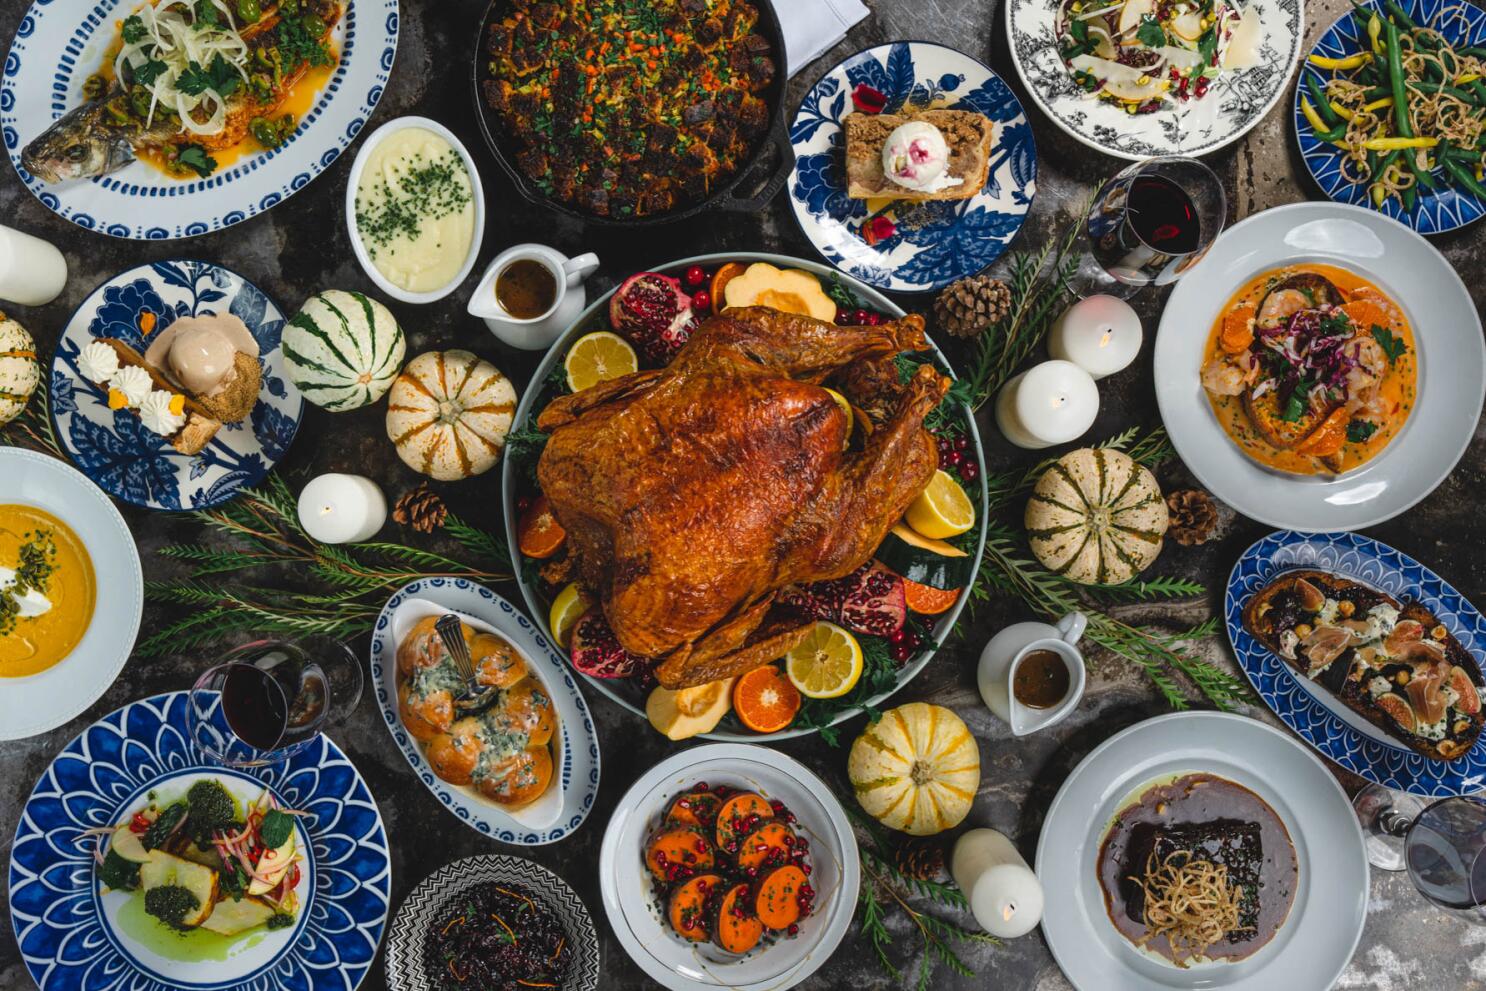 Friendsgiving 101: The Origin, Date and Traditions